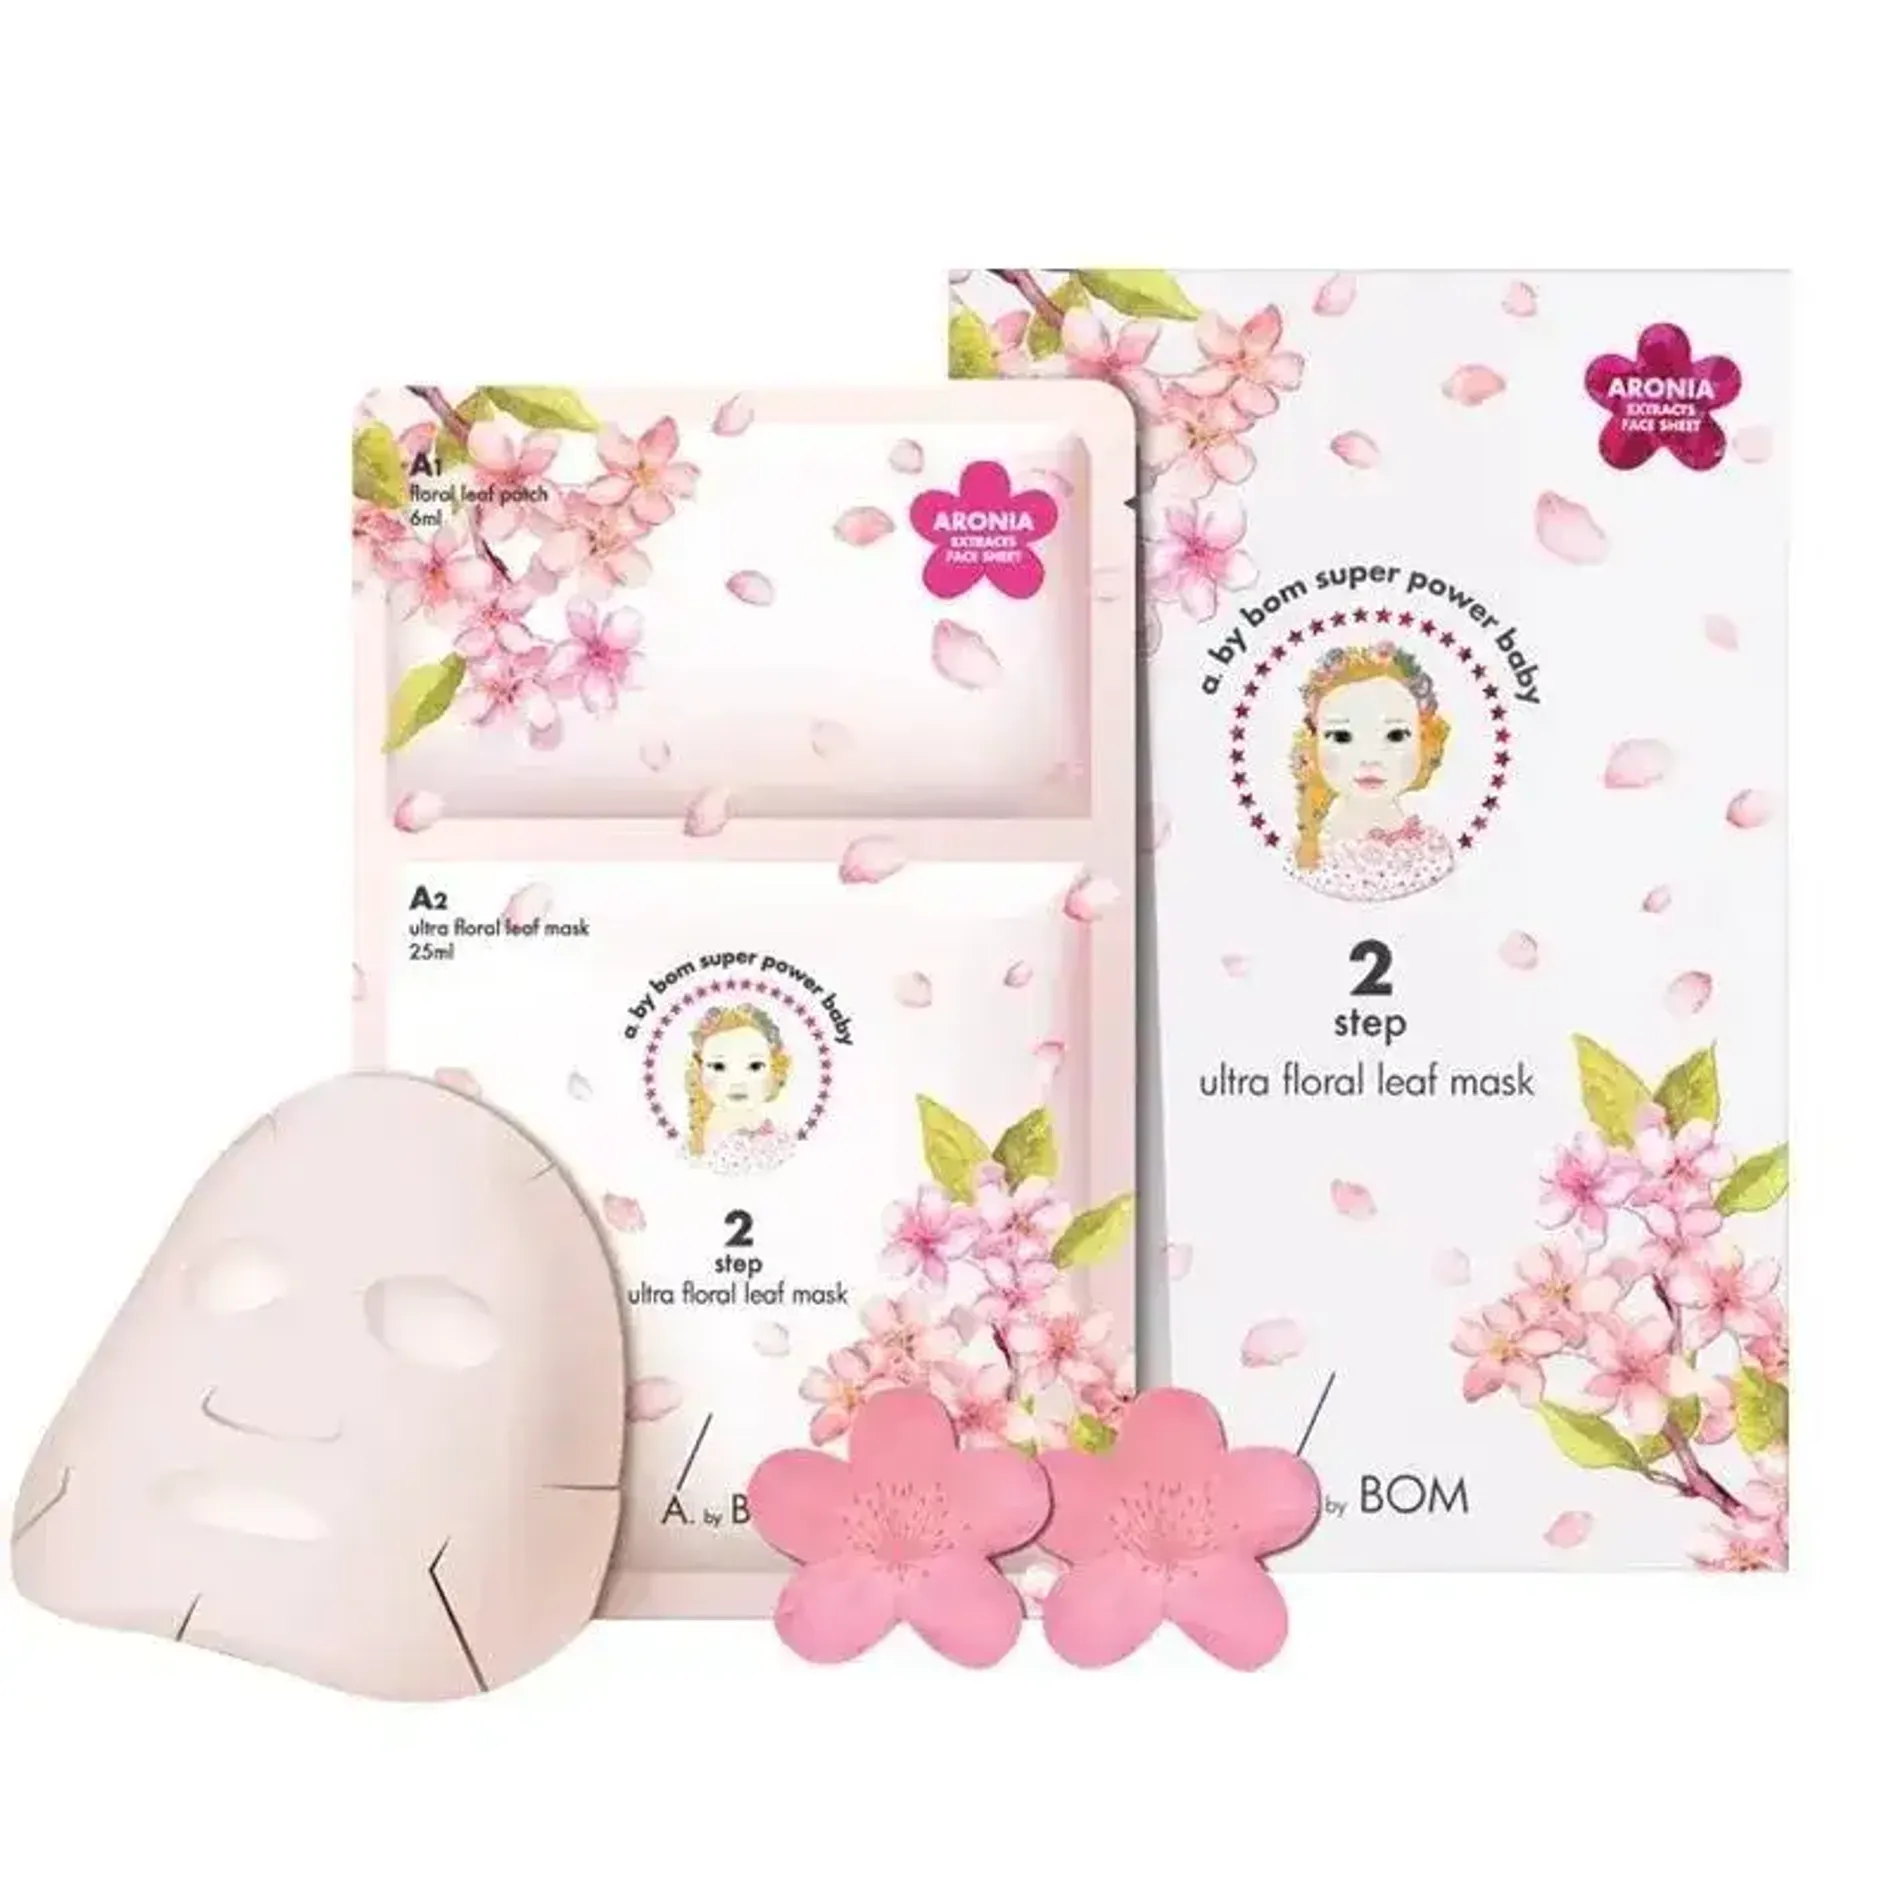 mat-na-giay-a-by-bom-ultra-floral-leaf-mask-2-step-2